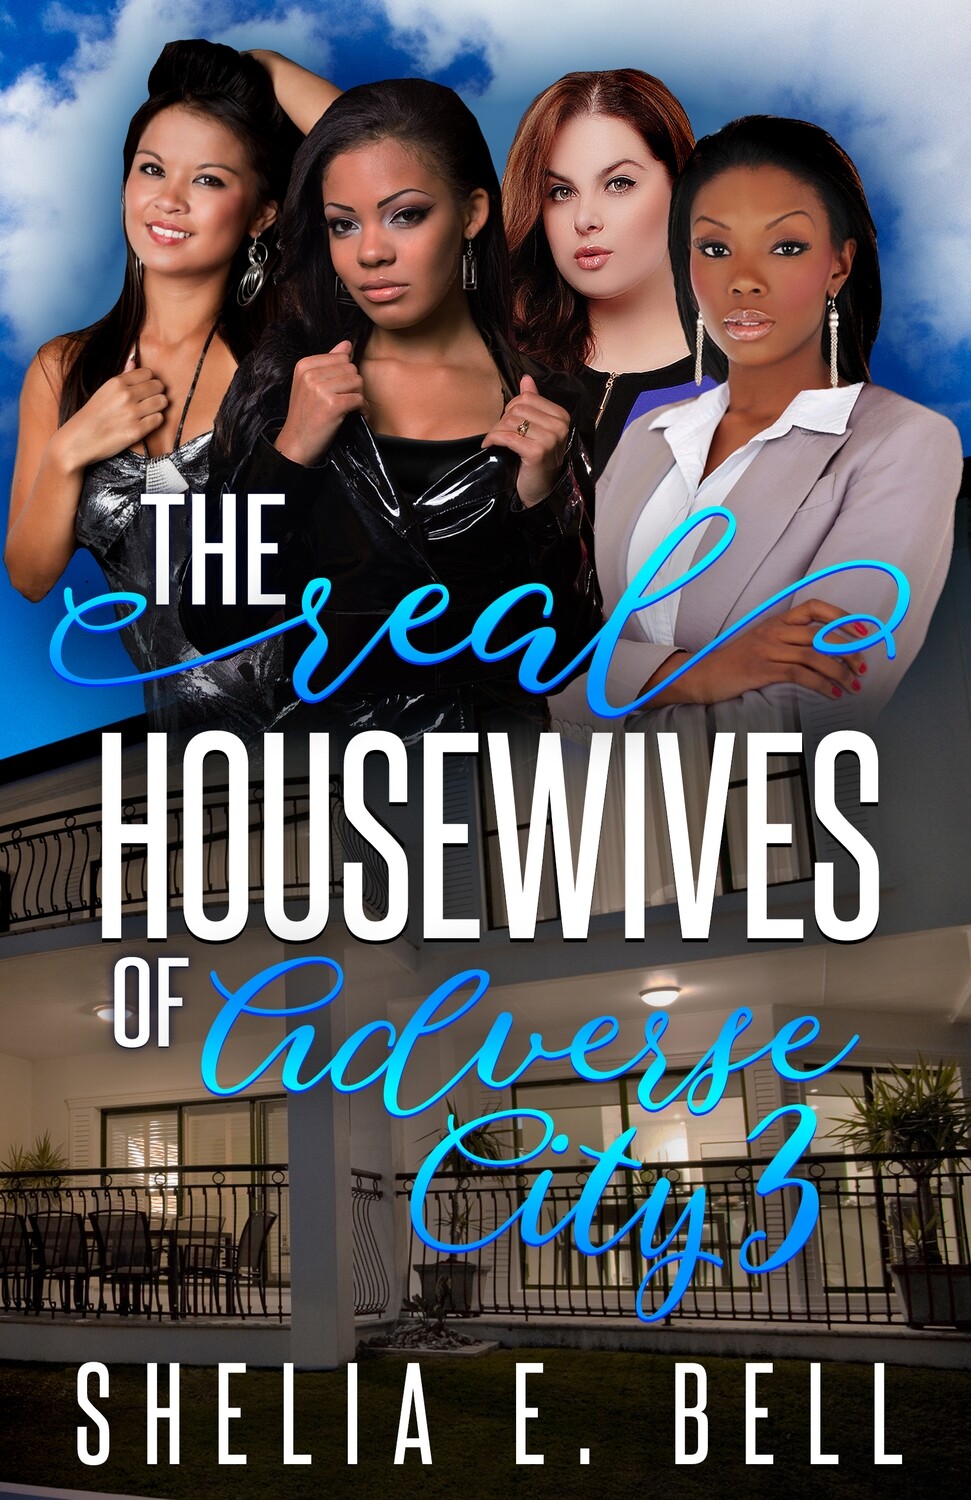 THE REAL HOUSEWIVES OF ADVERSE CITY Series (Book 3)